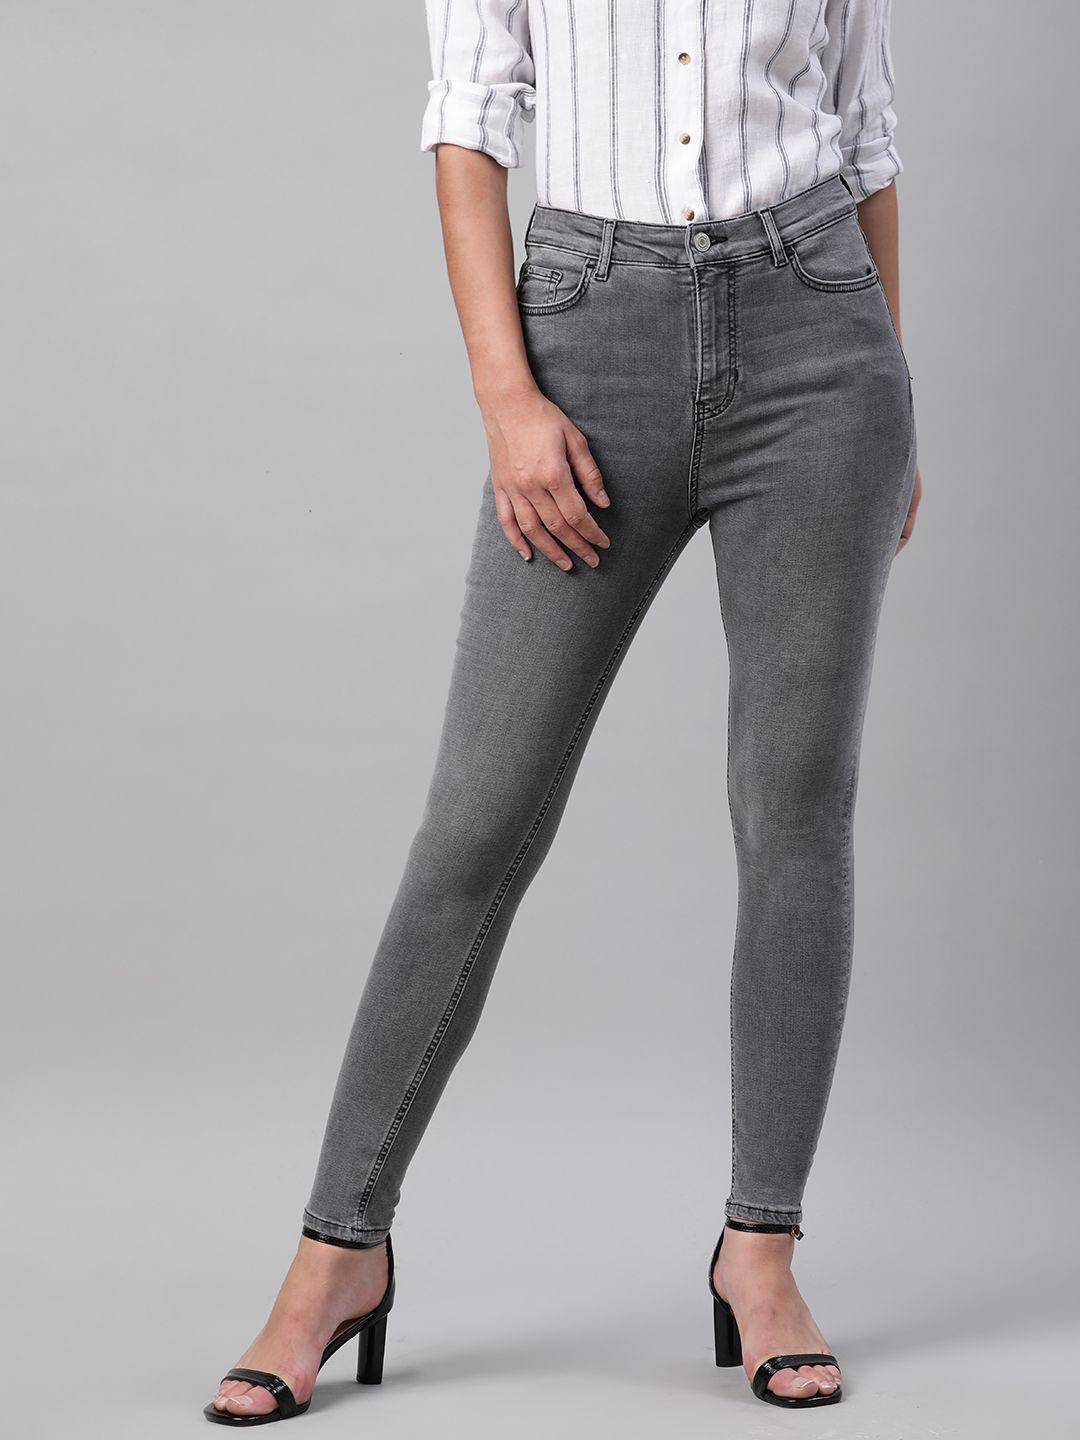 marks-&-spencer-women-grey-skinny-fit-mid-rise-clean-look-stretchable-jeans